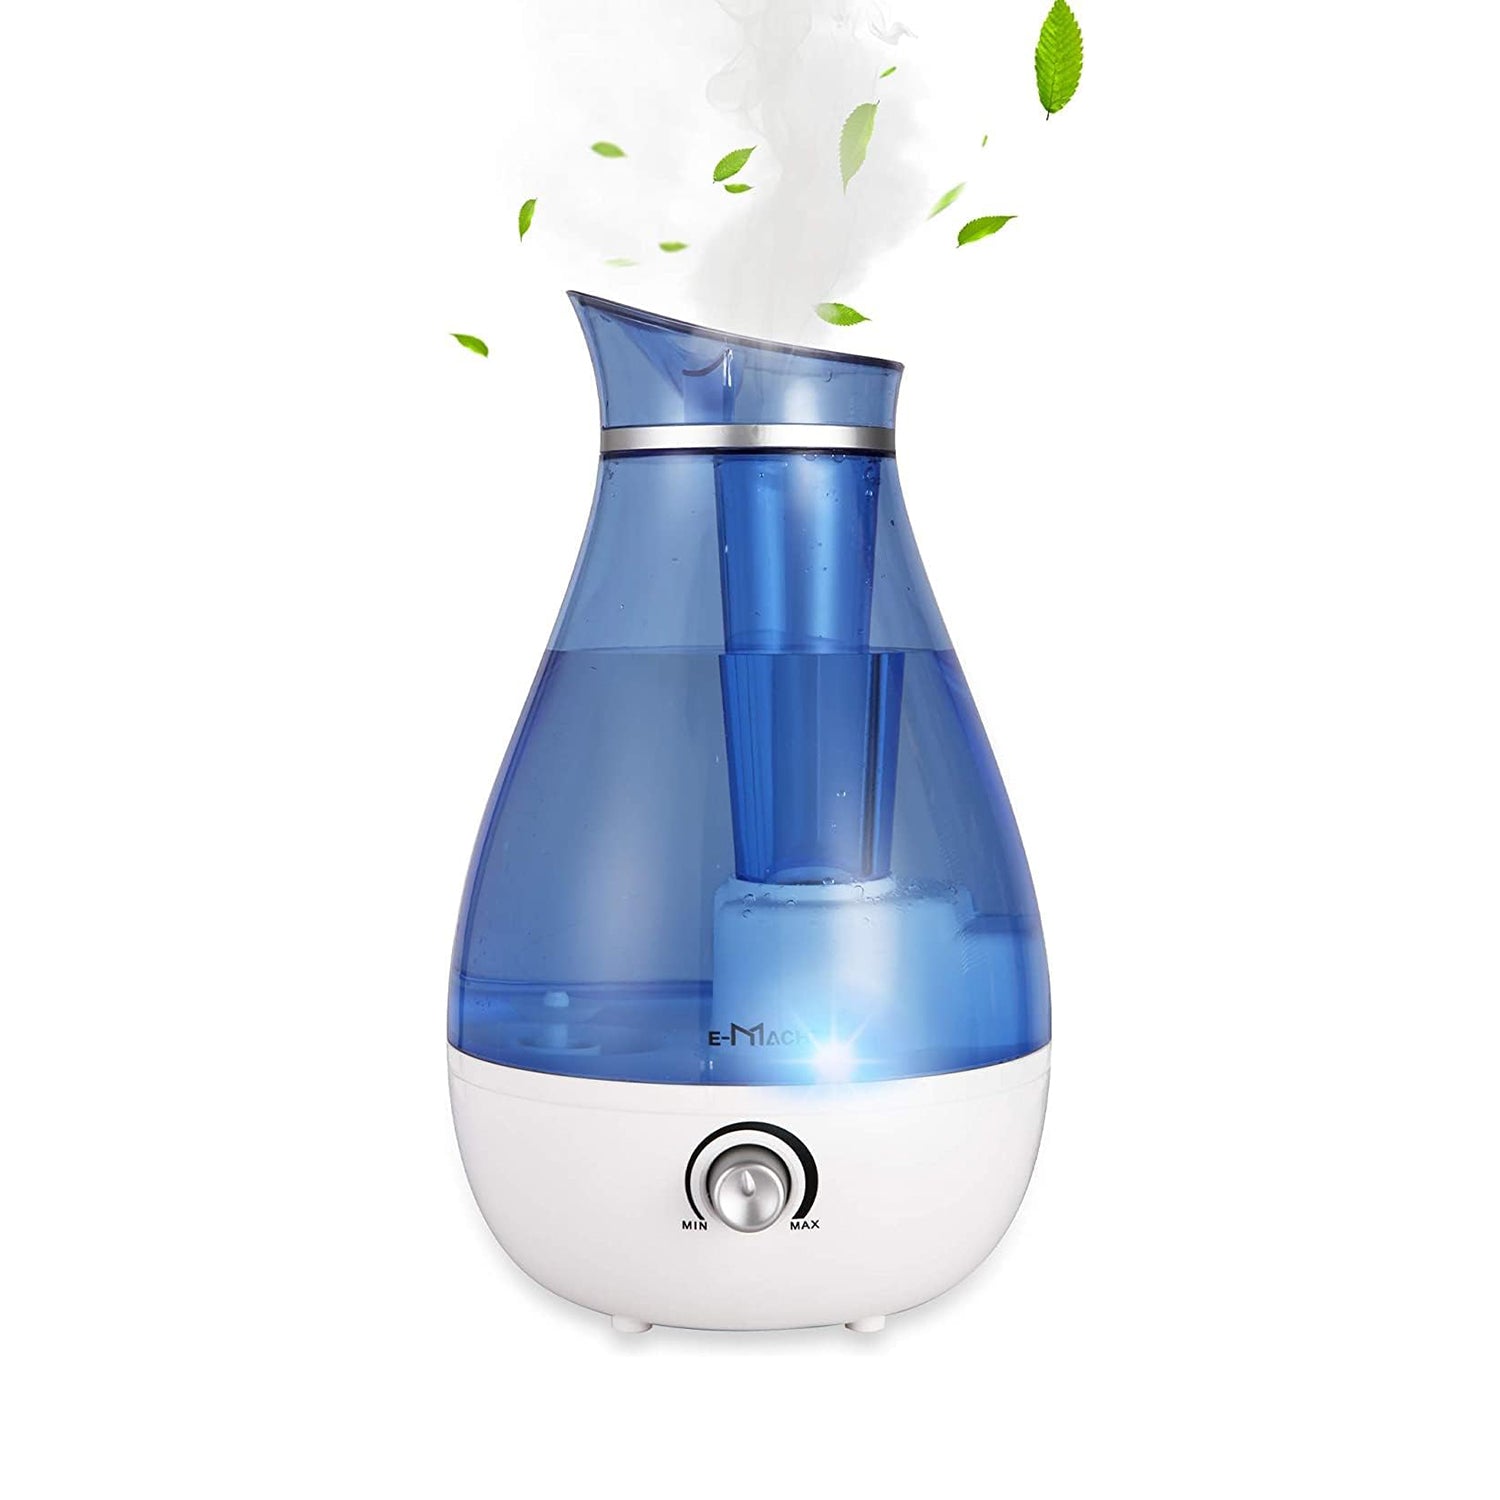 Humidifiers for Bedroom Quiet Ultrasonic Cool Mist Humidifier 2.5L with Auto Shut-Off, Less Than 30dB, Blue